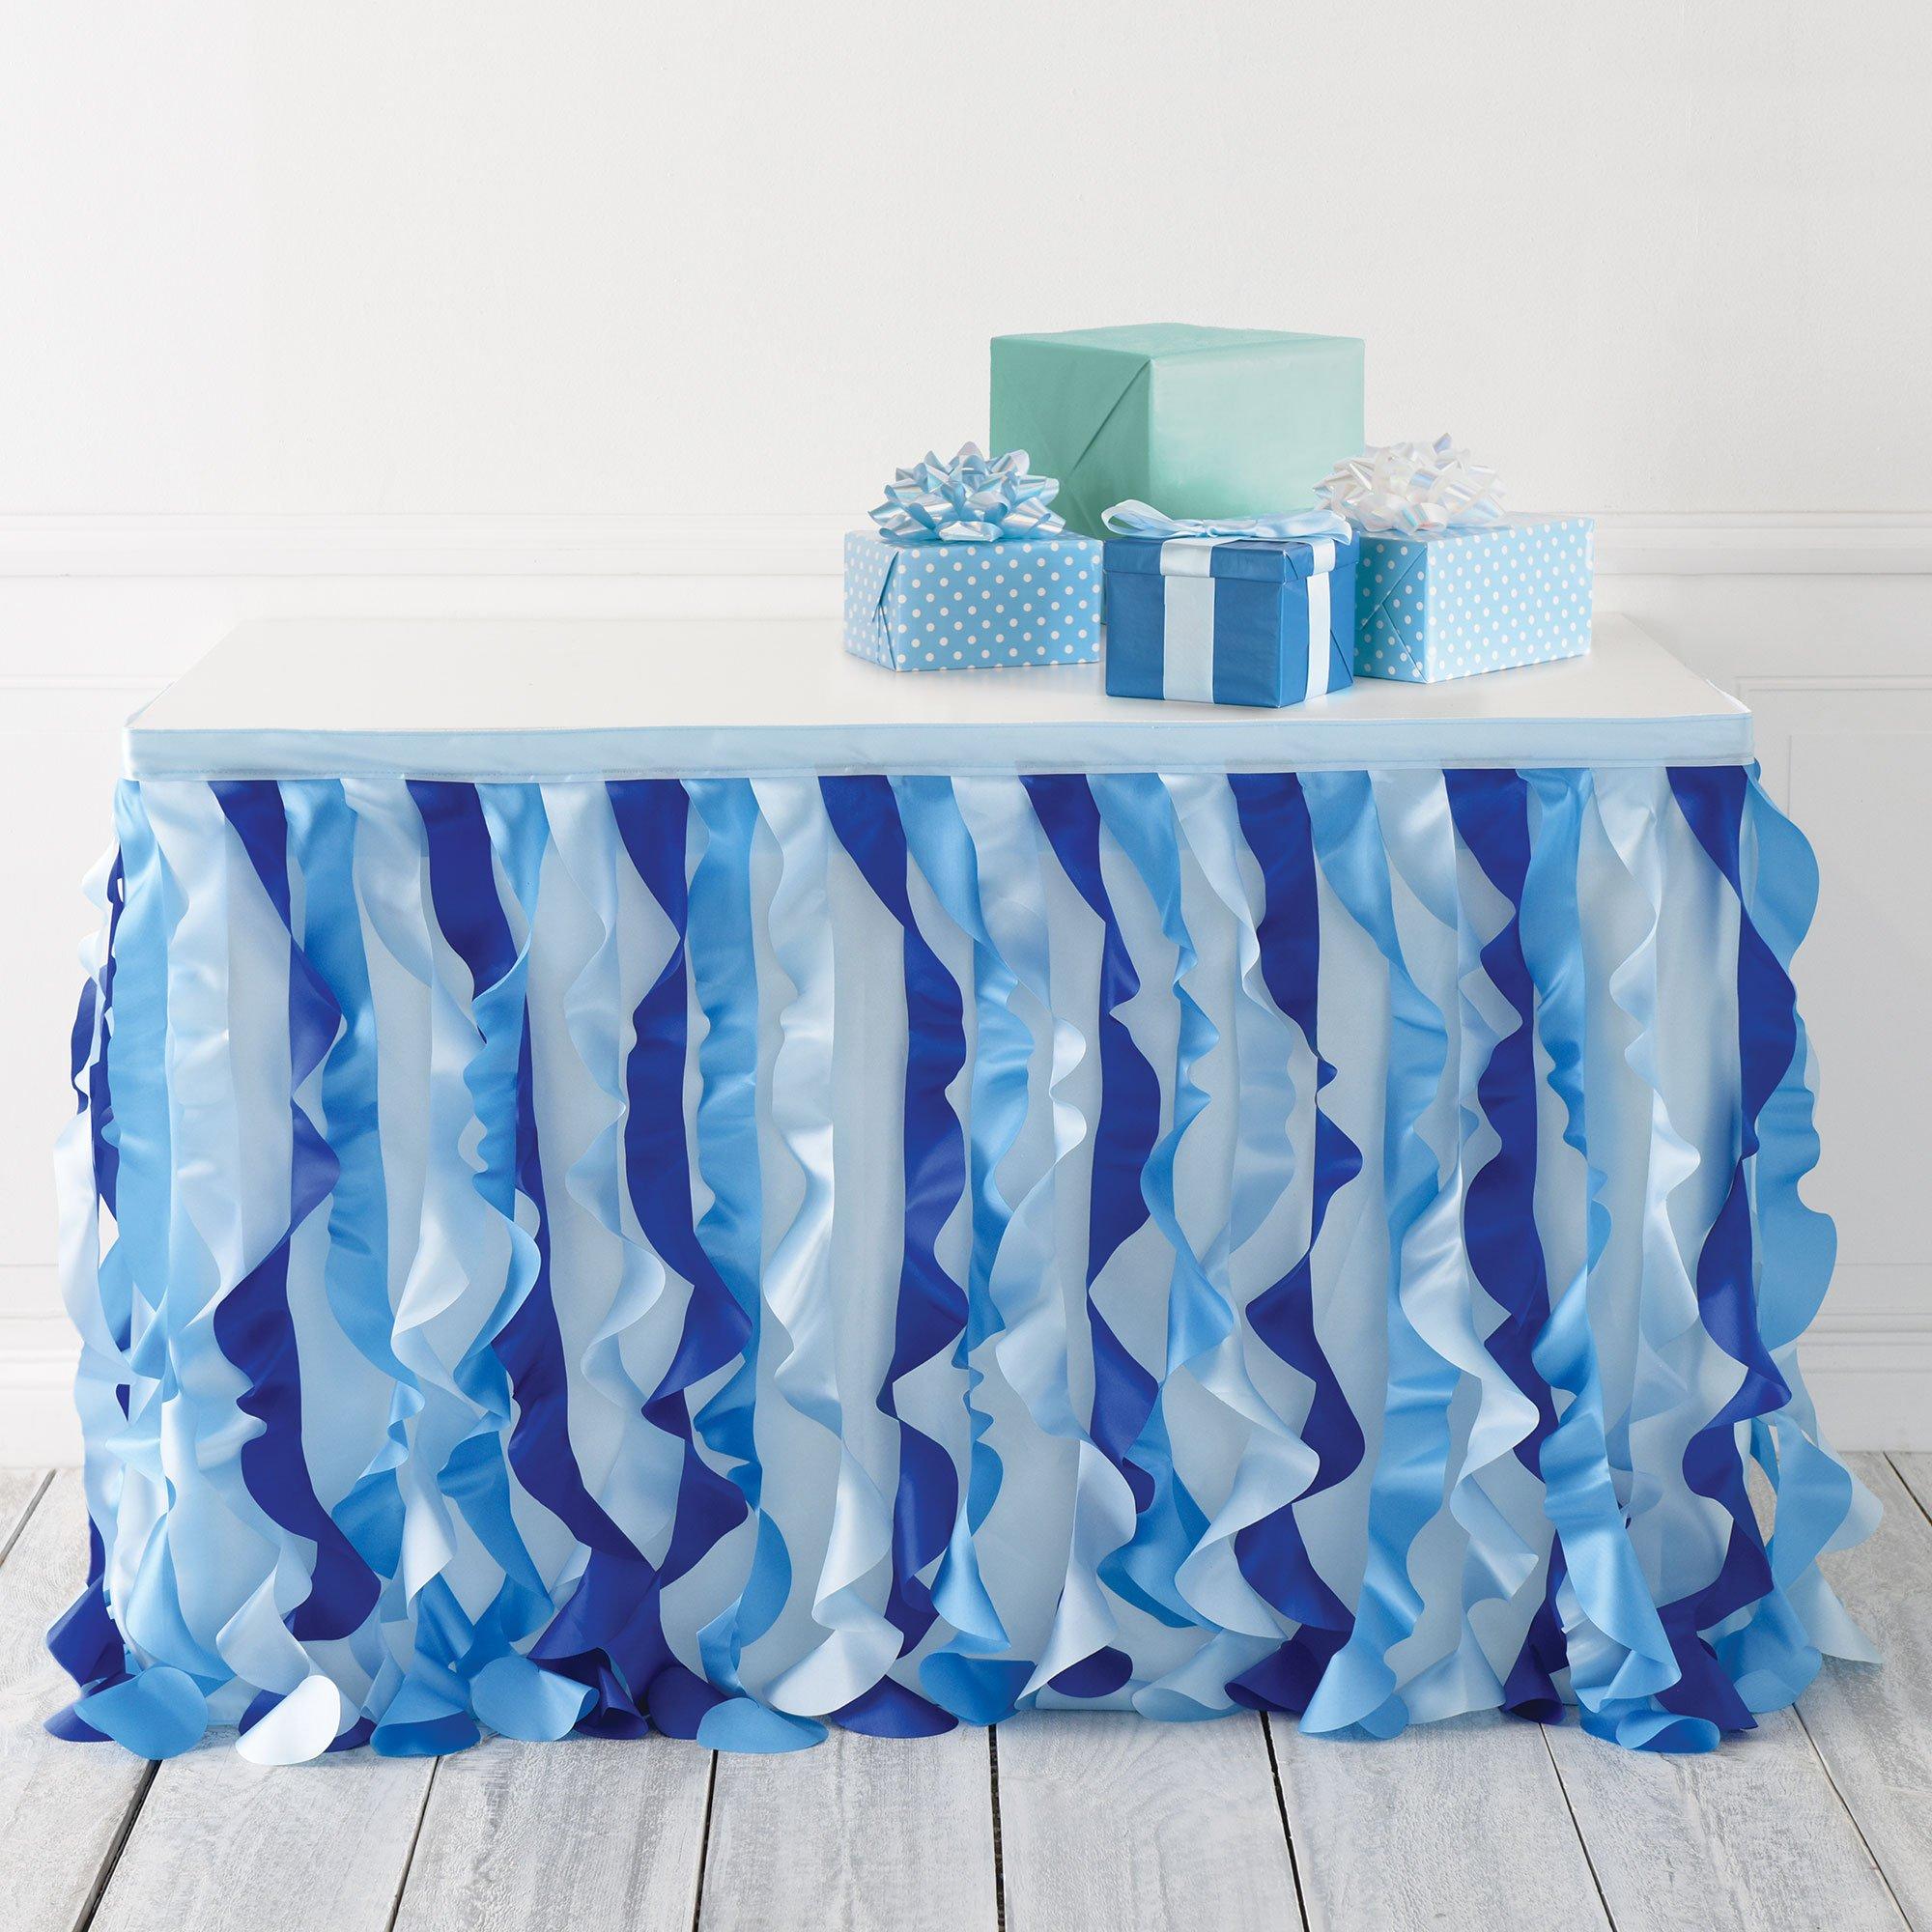 Blue Fabric Ruffle Table Skirt, 30in x 72in - Oh Baby! Boy